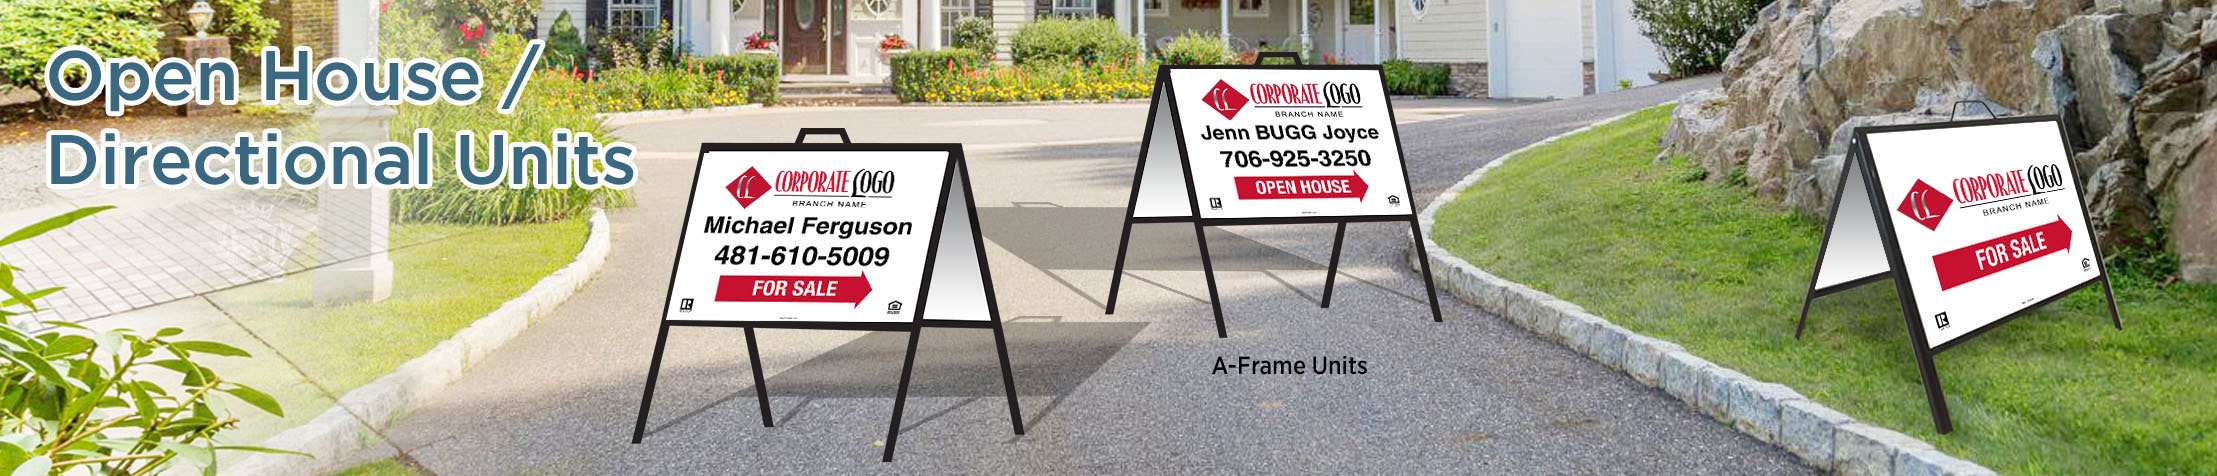 HomeSmart Real Estate Open House/Directional Units - HomeSmart  directional real estate signs | BestPrintBuy.com